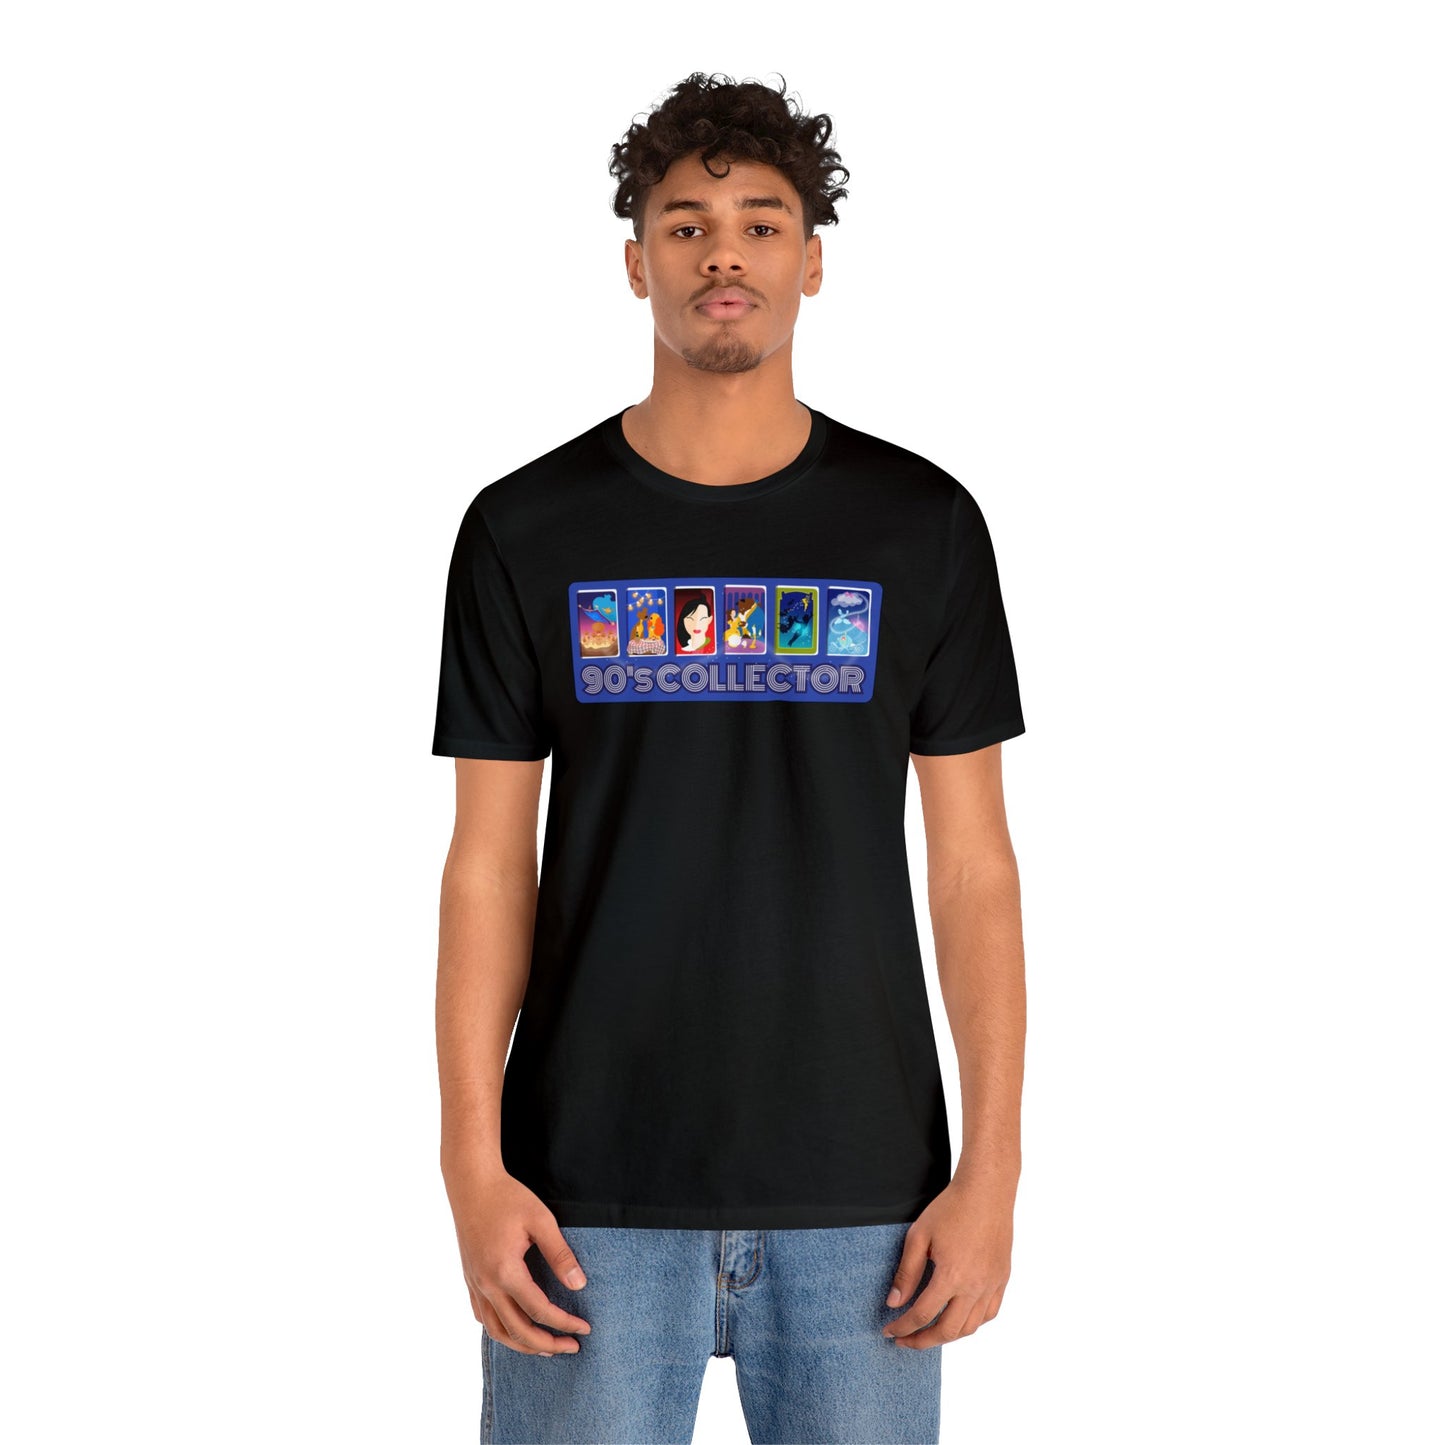 90's Collector Unisex Graphic Tee